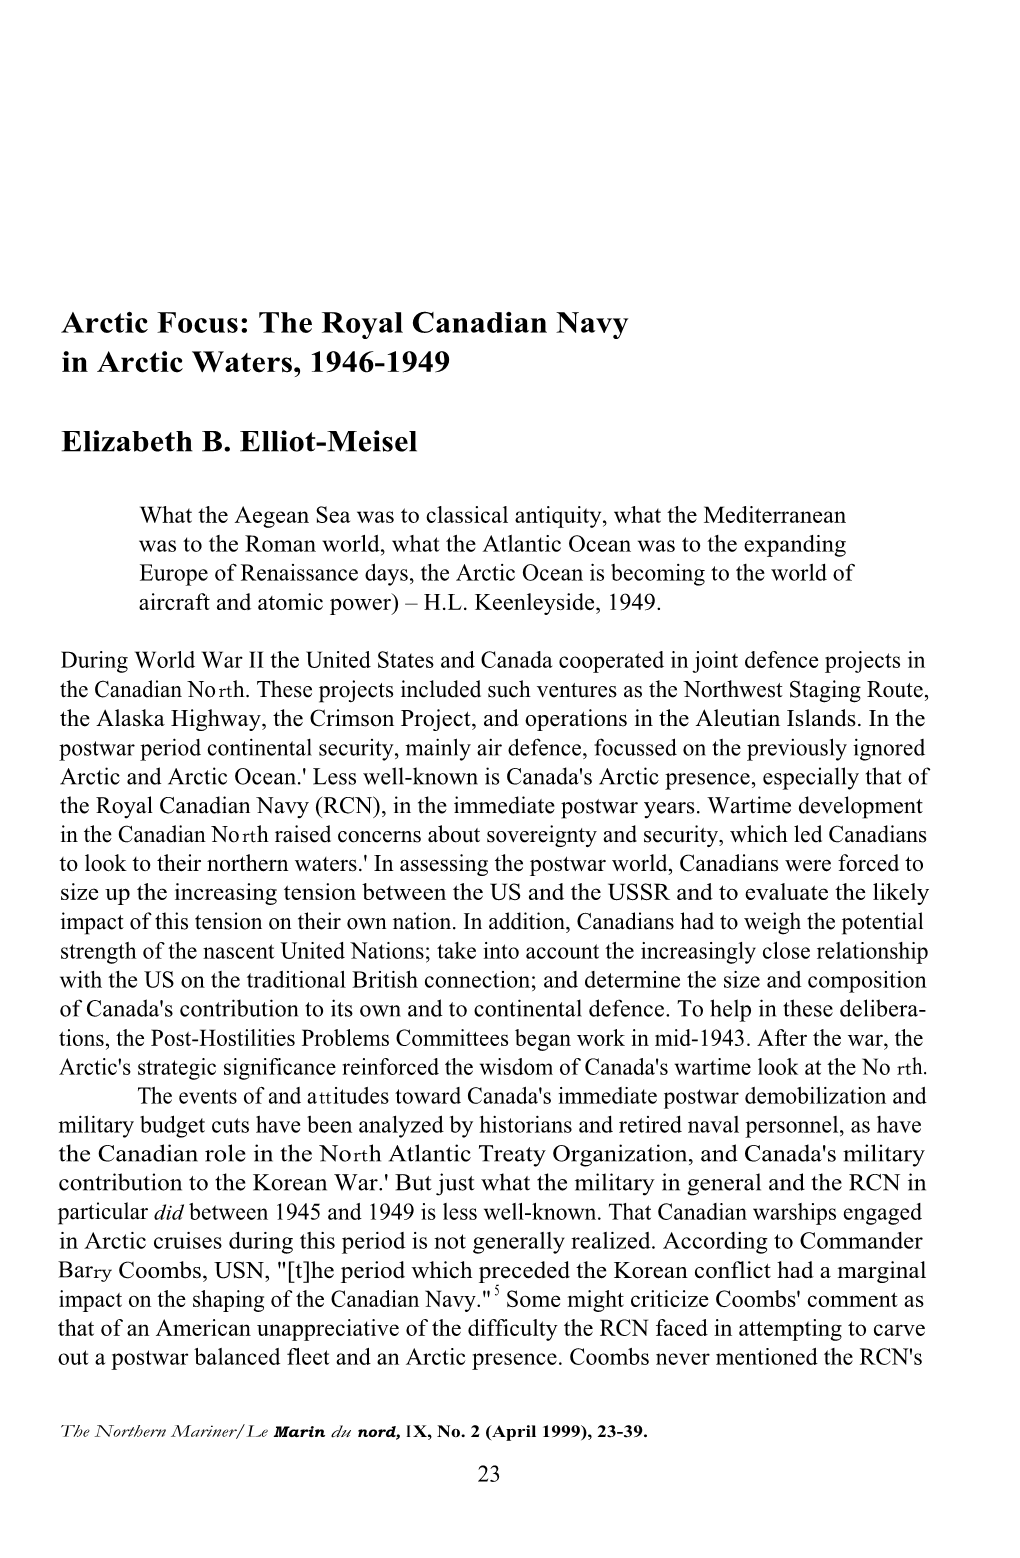 Arctic Focus: the Royal Canadian Navy in Arctic Waters, 1946-1949